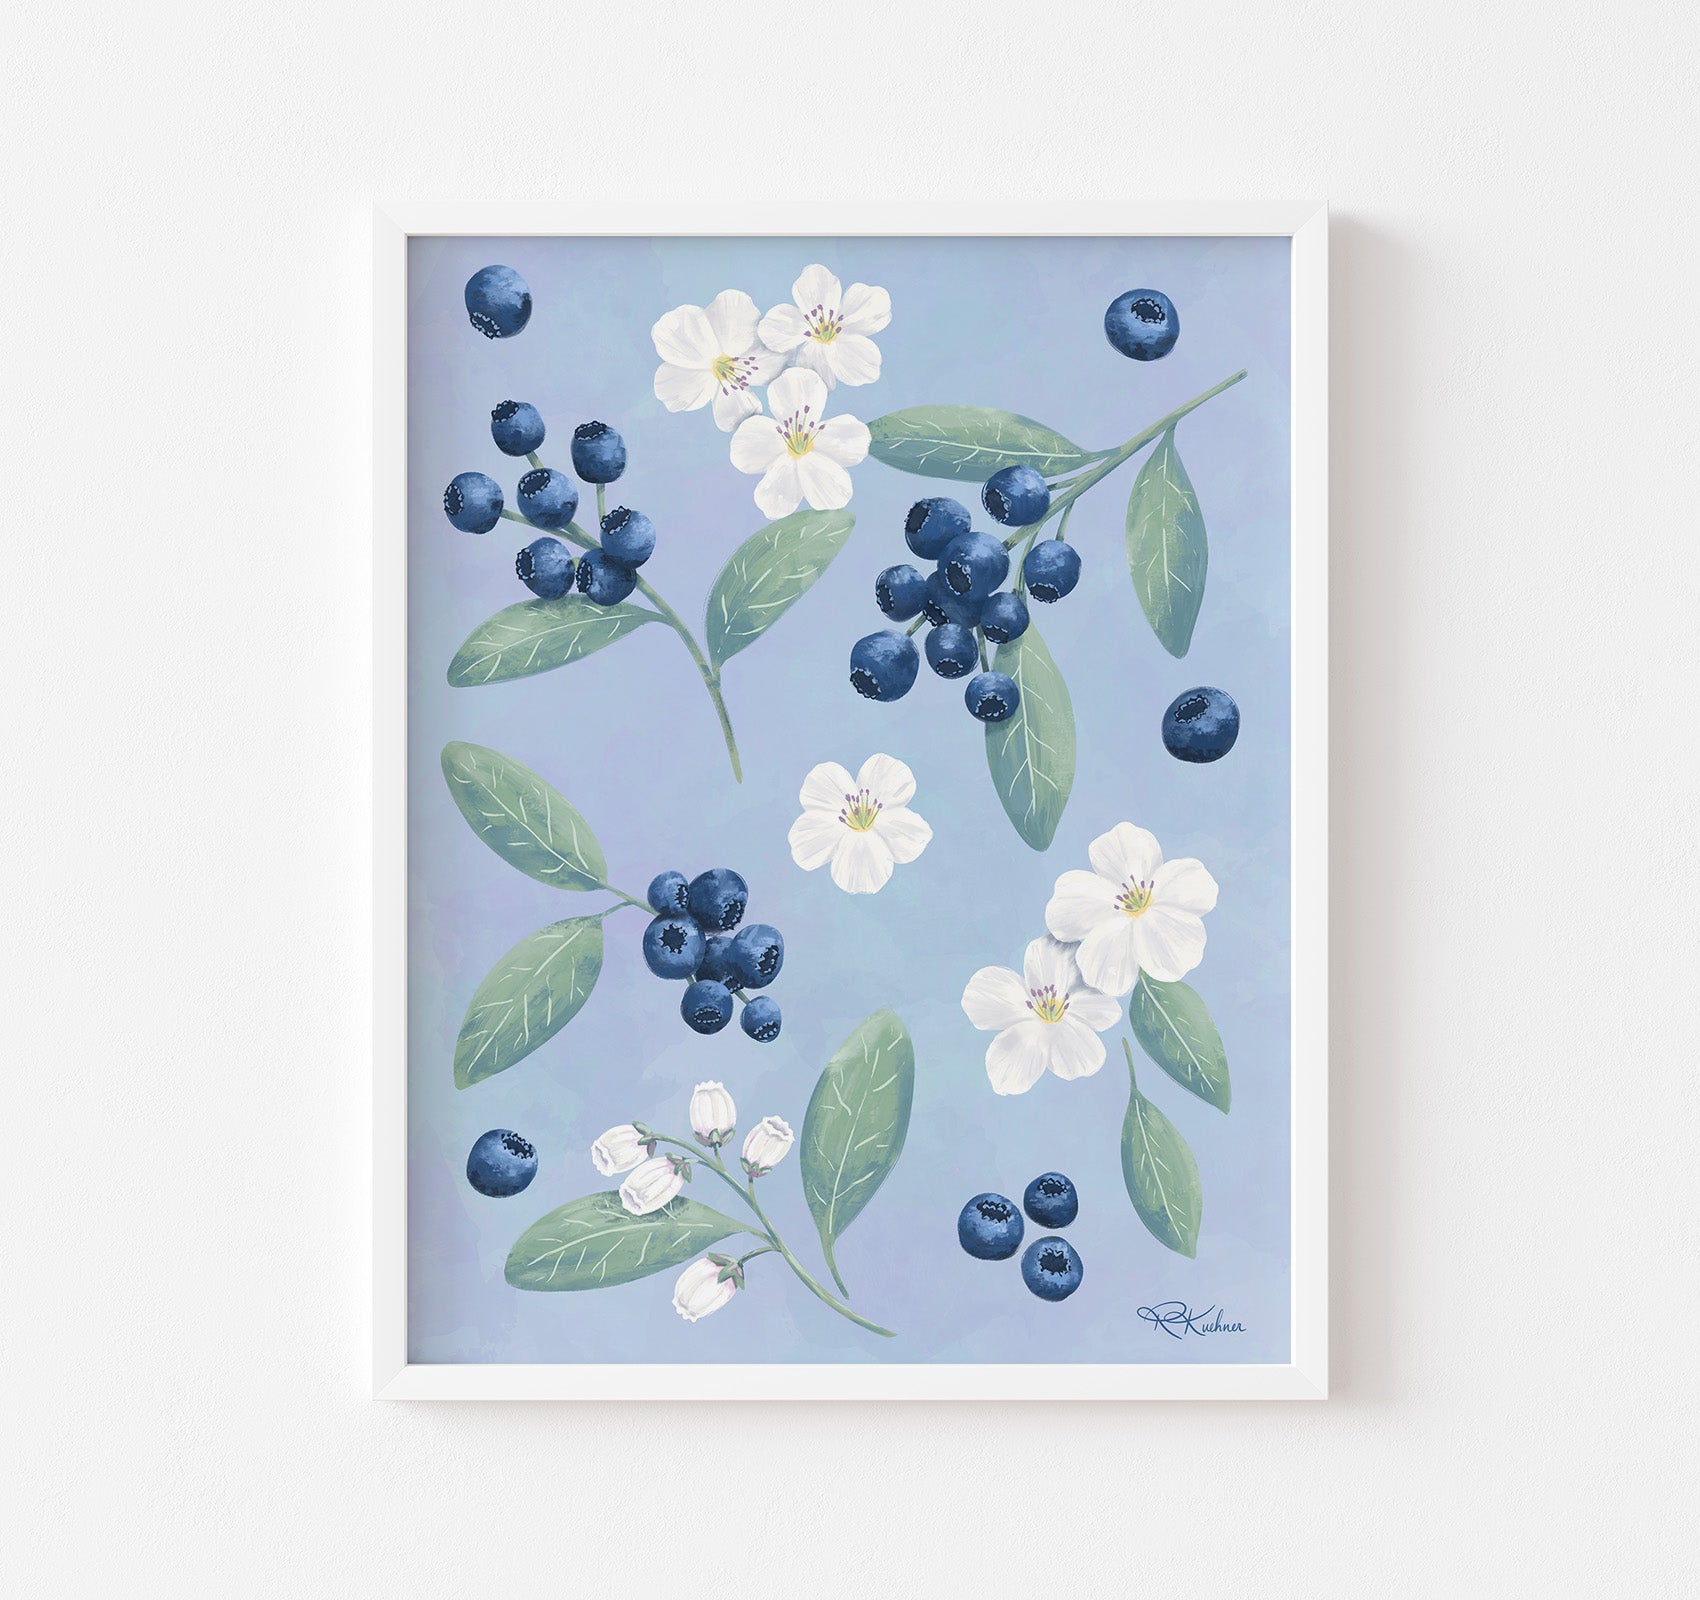 Art print of a painting of blueberries with white fruit flower blossoms